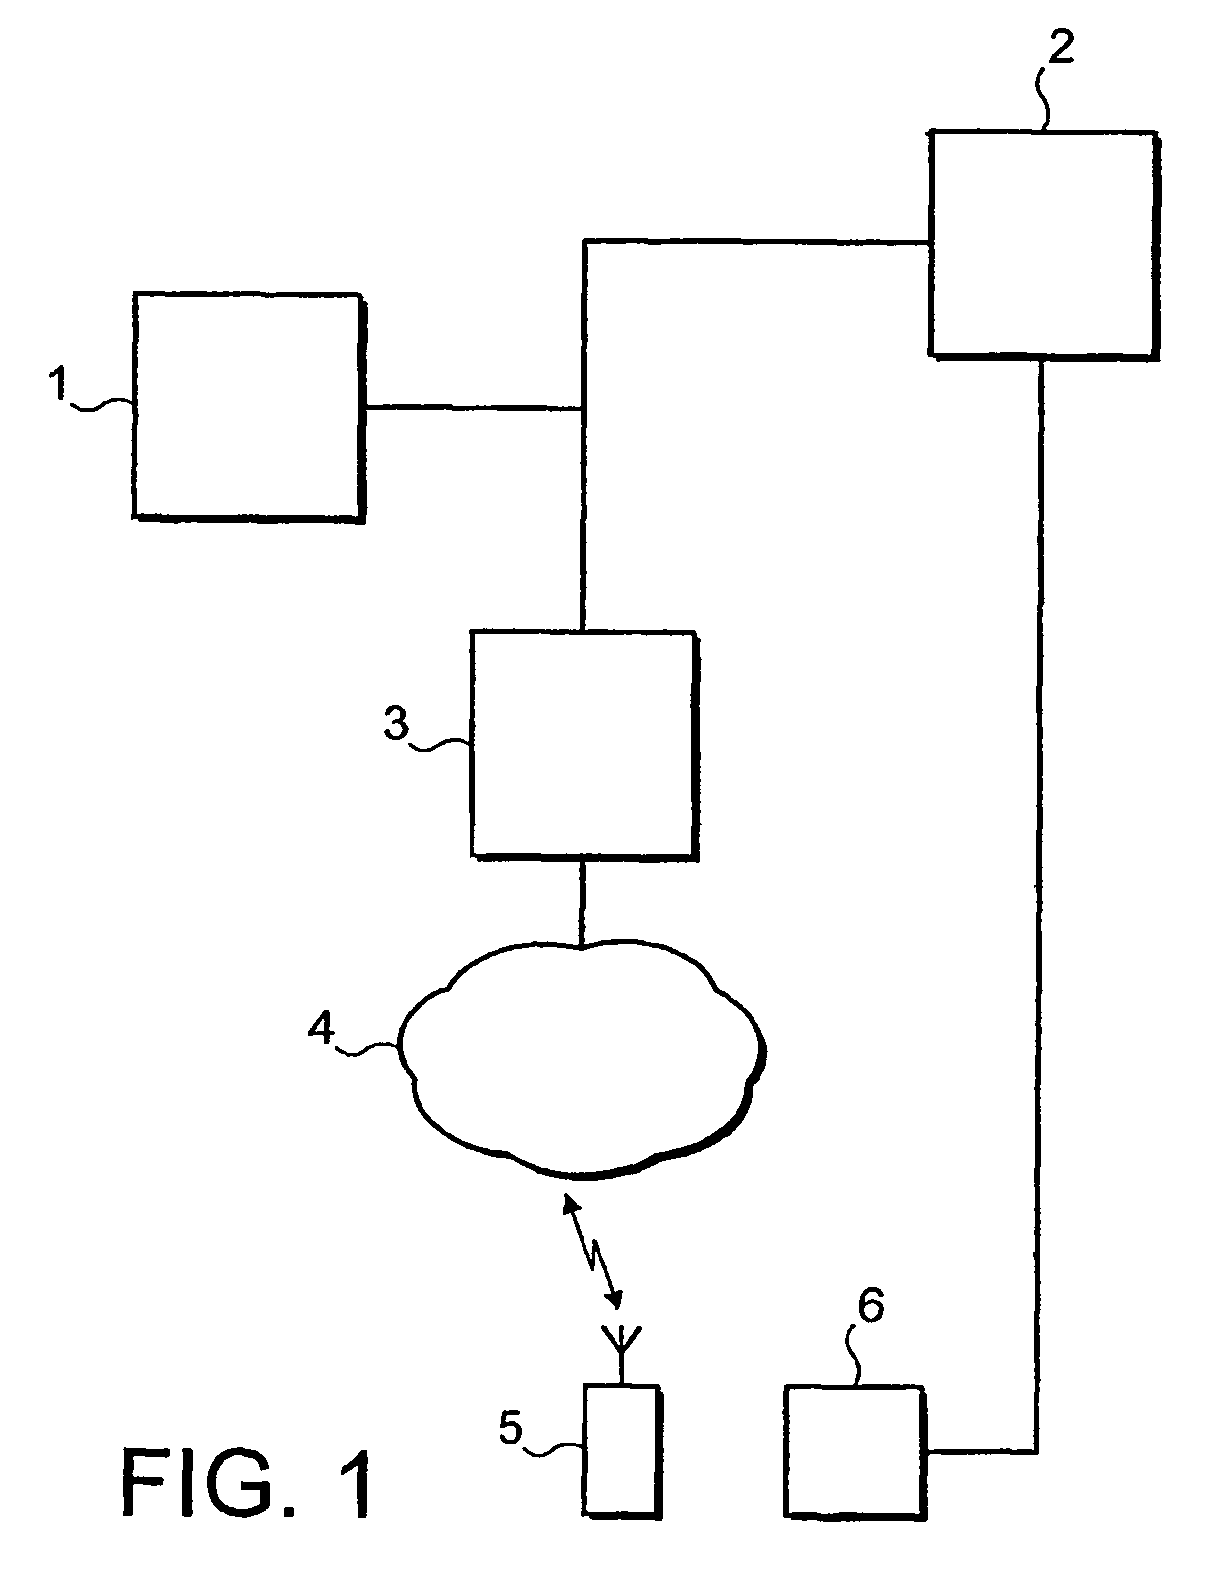 Method of operating a ticketing system